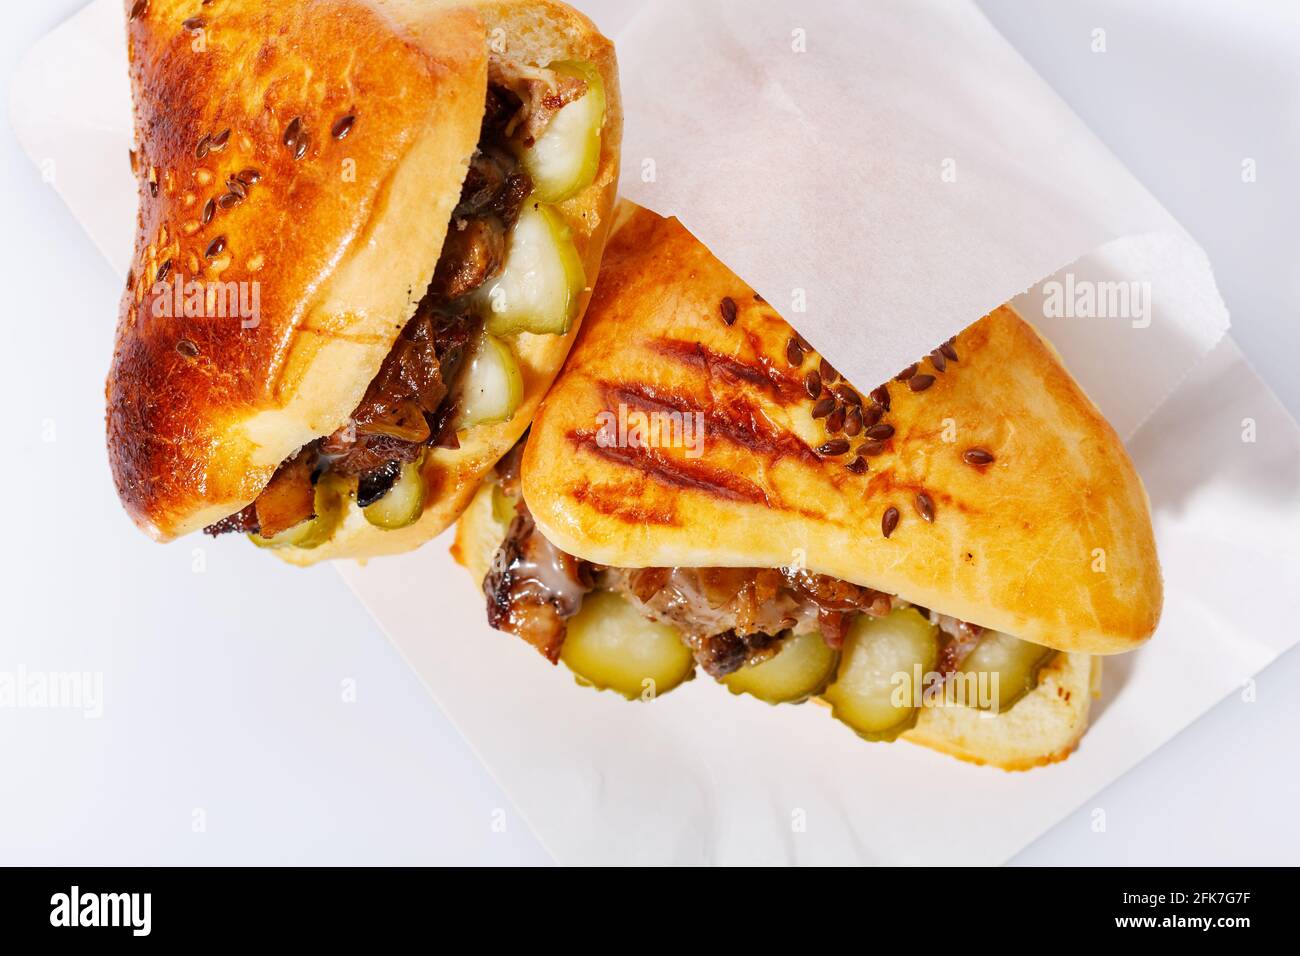 Fragrant buns with meat and pickles on a white background. Street food concept. Top view, close up. Stock Photo